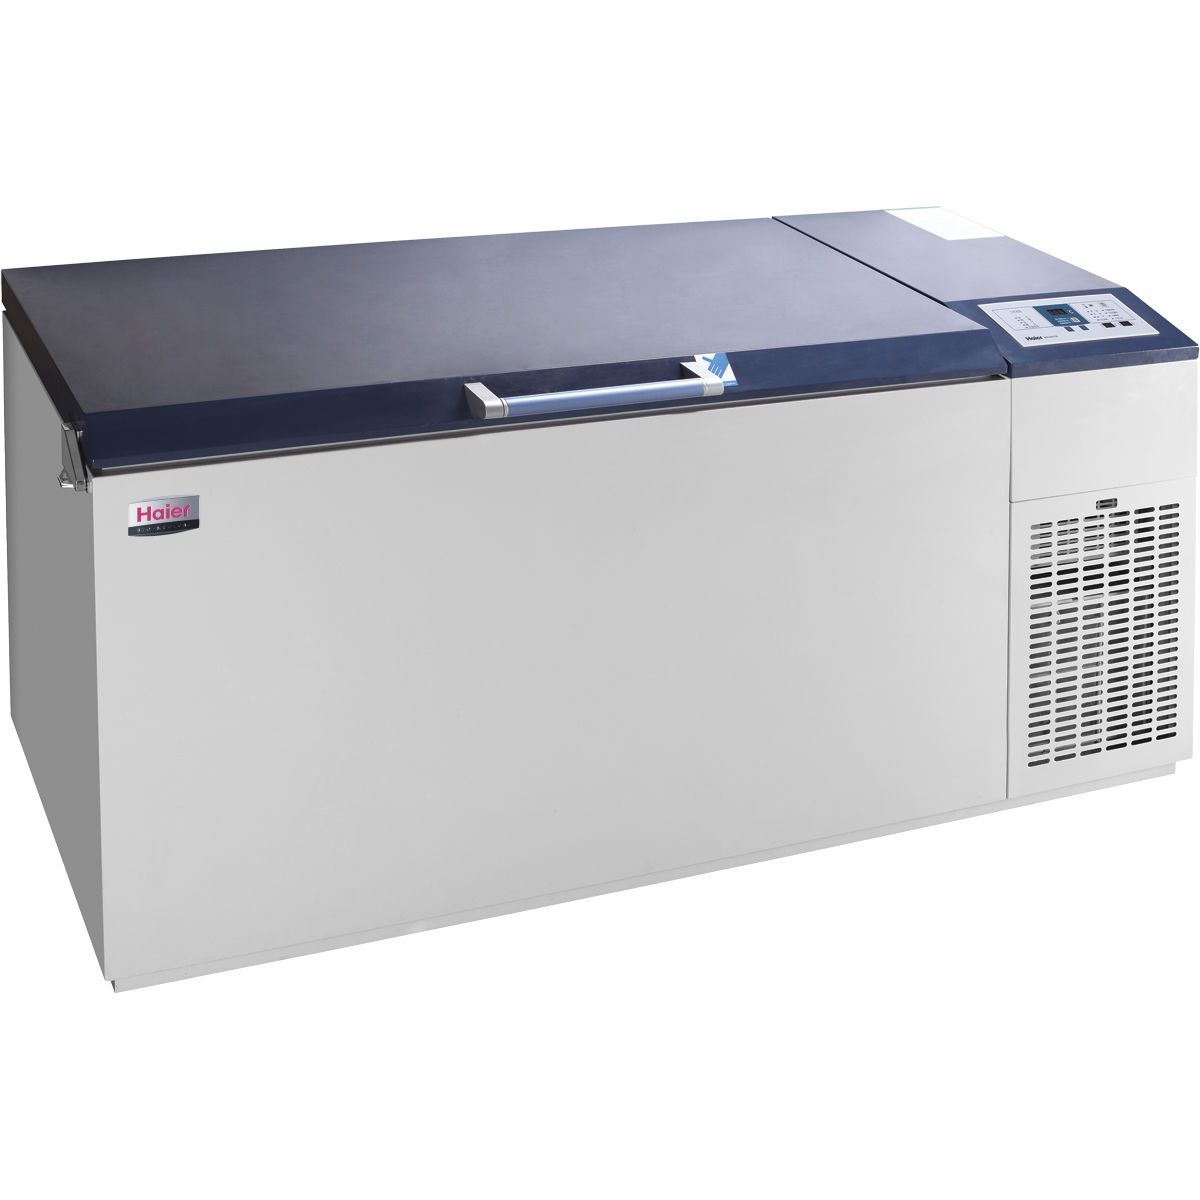 Laboratory freezer / chest / ultralow-temperature / 1-door -86 °C, 420 L | DW-86W420 Haier Medical and Laboratory Products